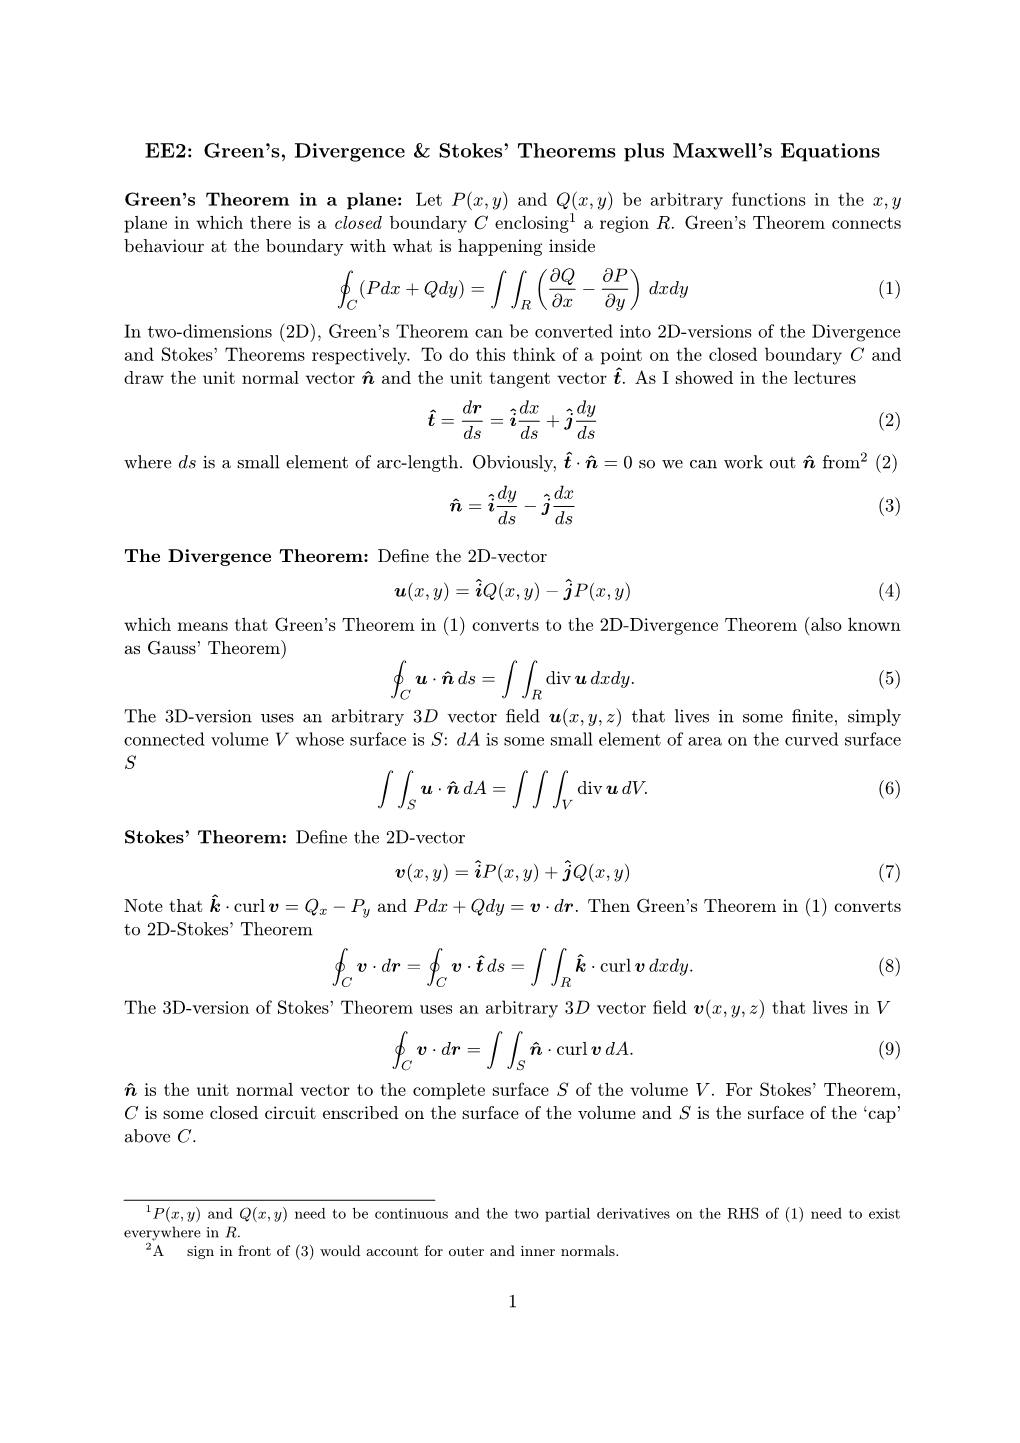 EE2: Green's, Divergence & Stokes' Theorems Plus Maxwell's Equations